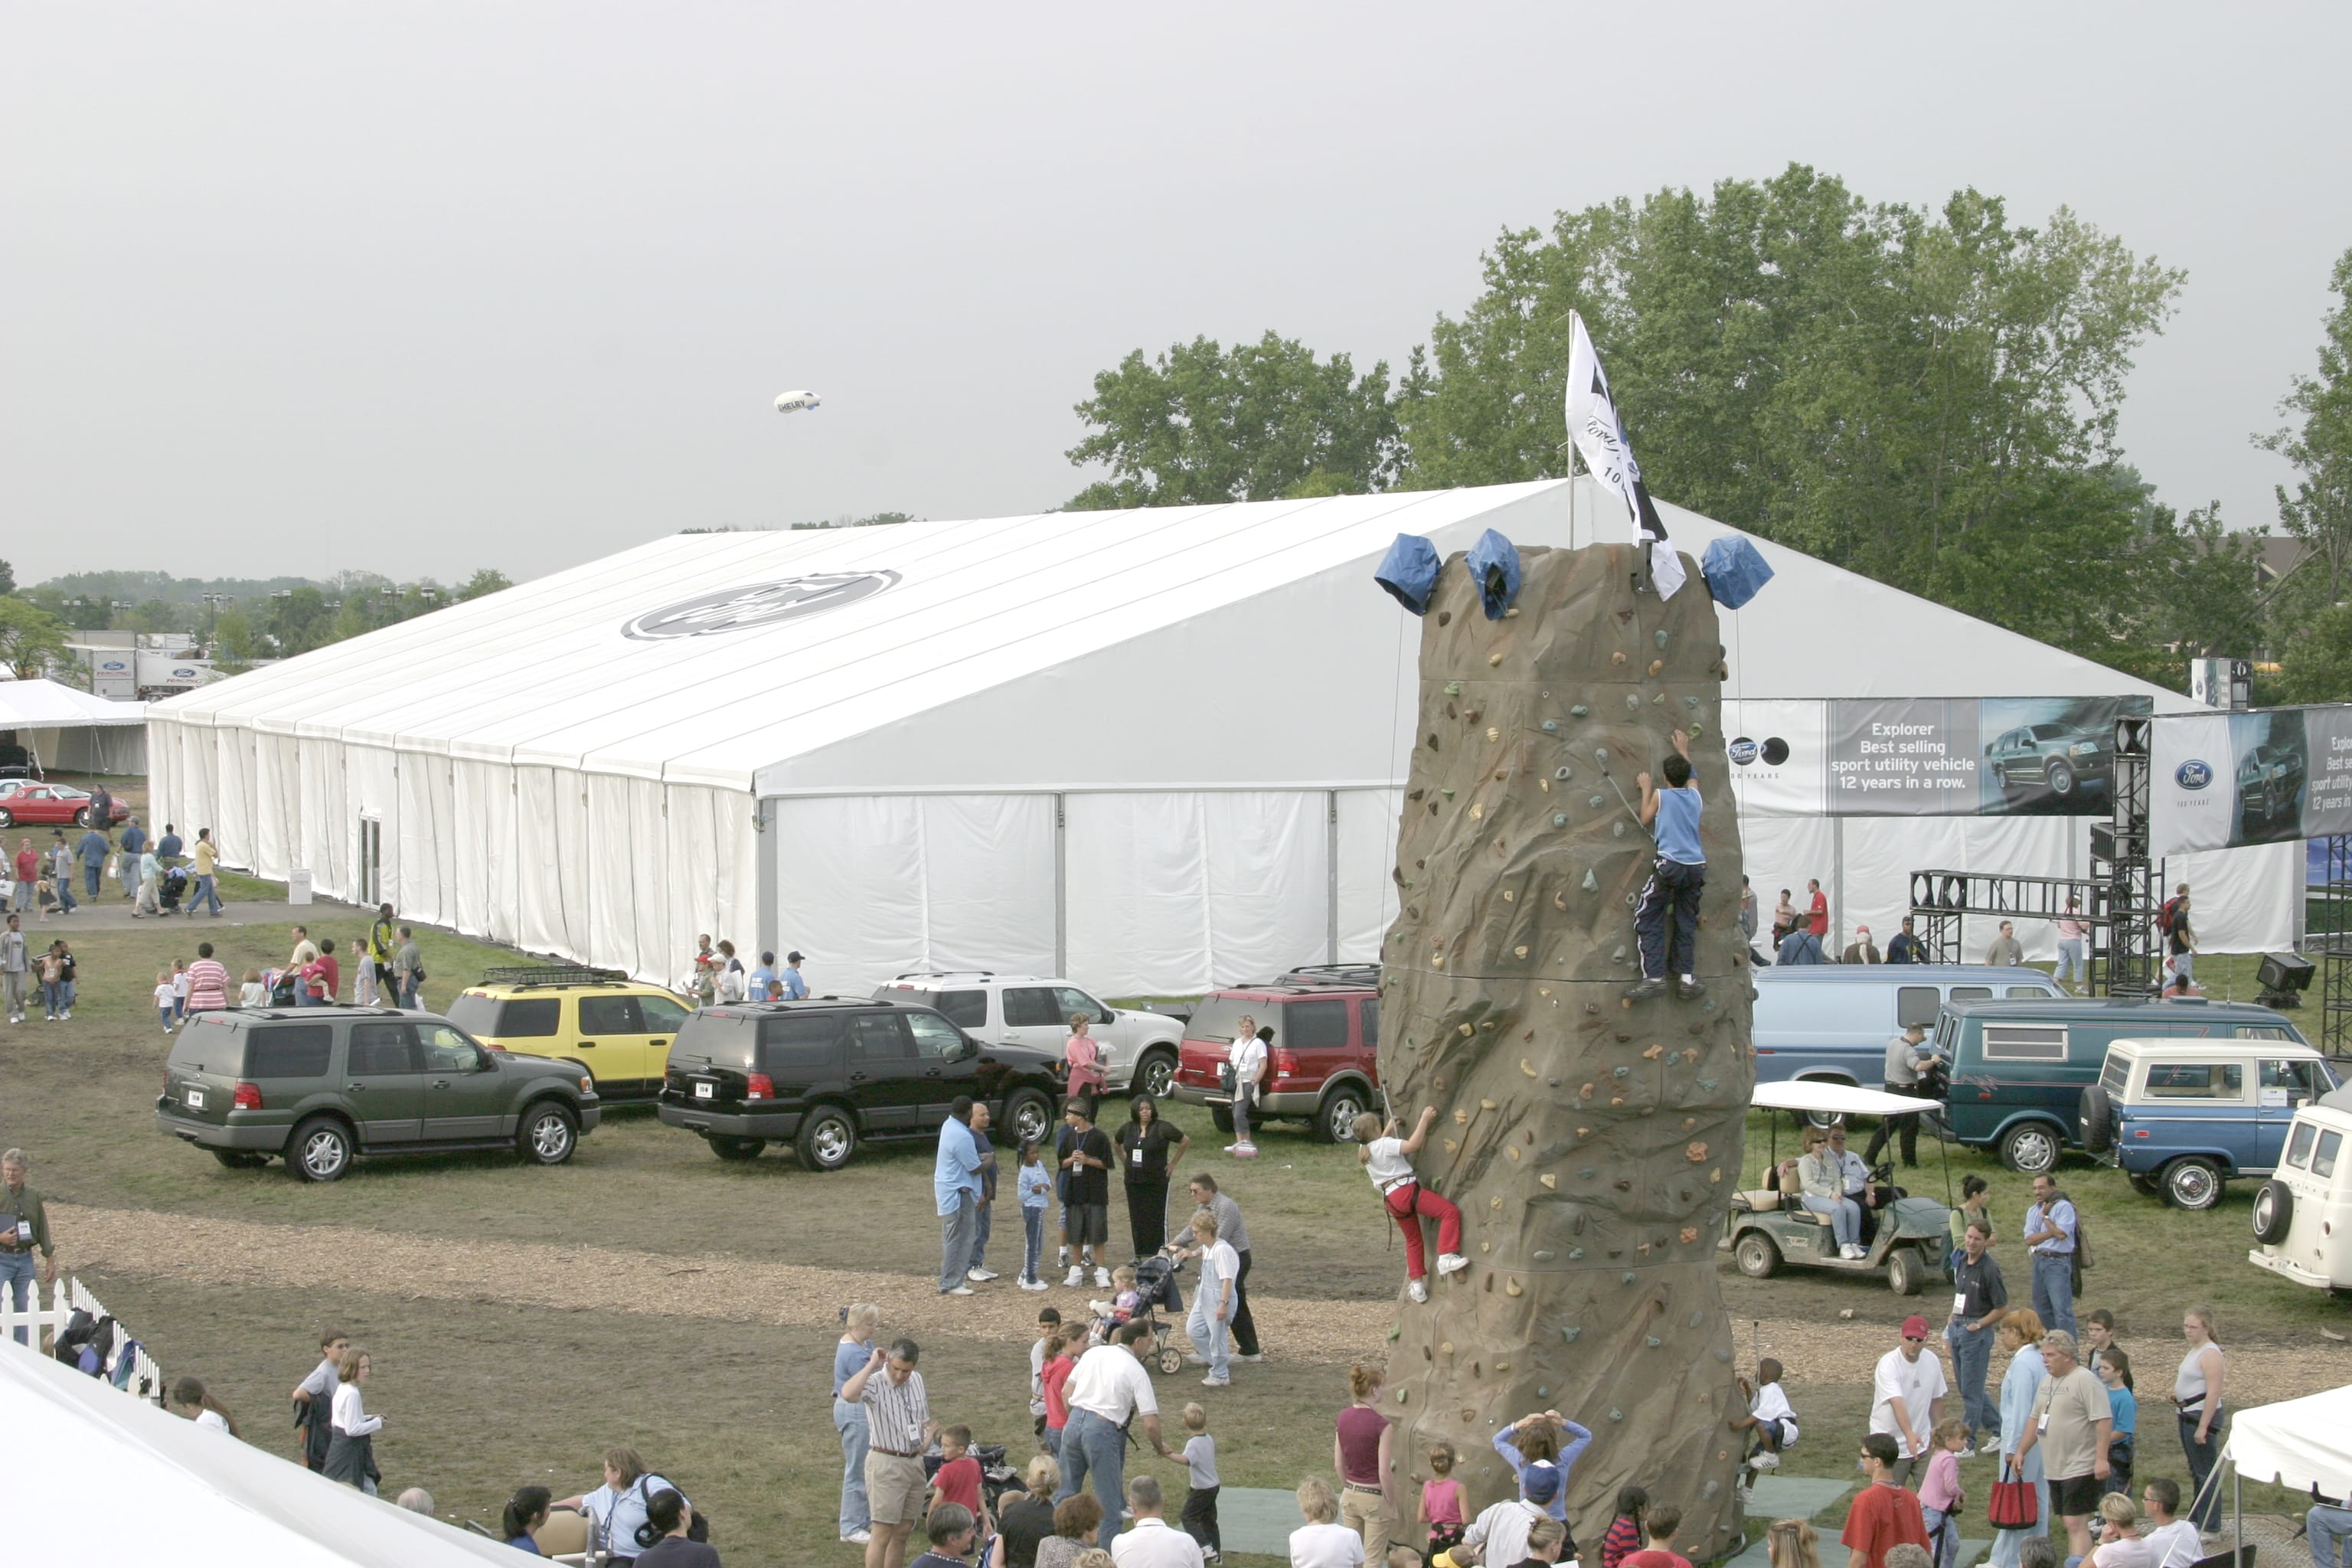 5 Uses for Temporary Structures | American Pavilion